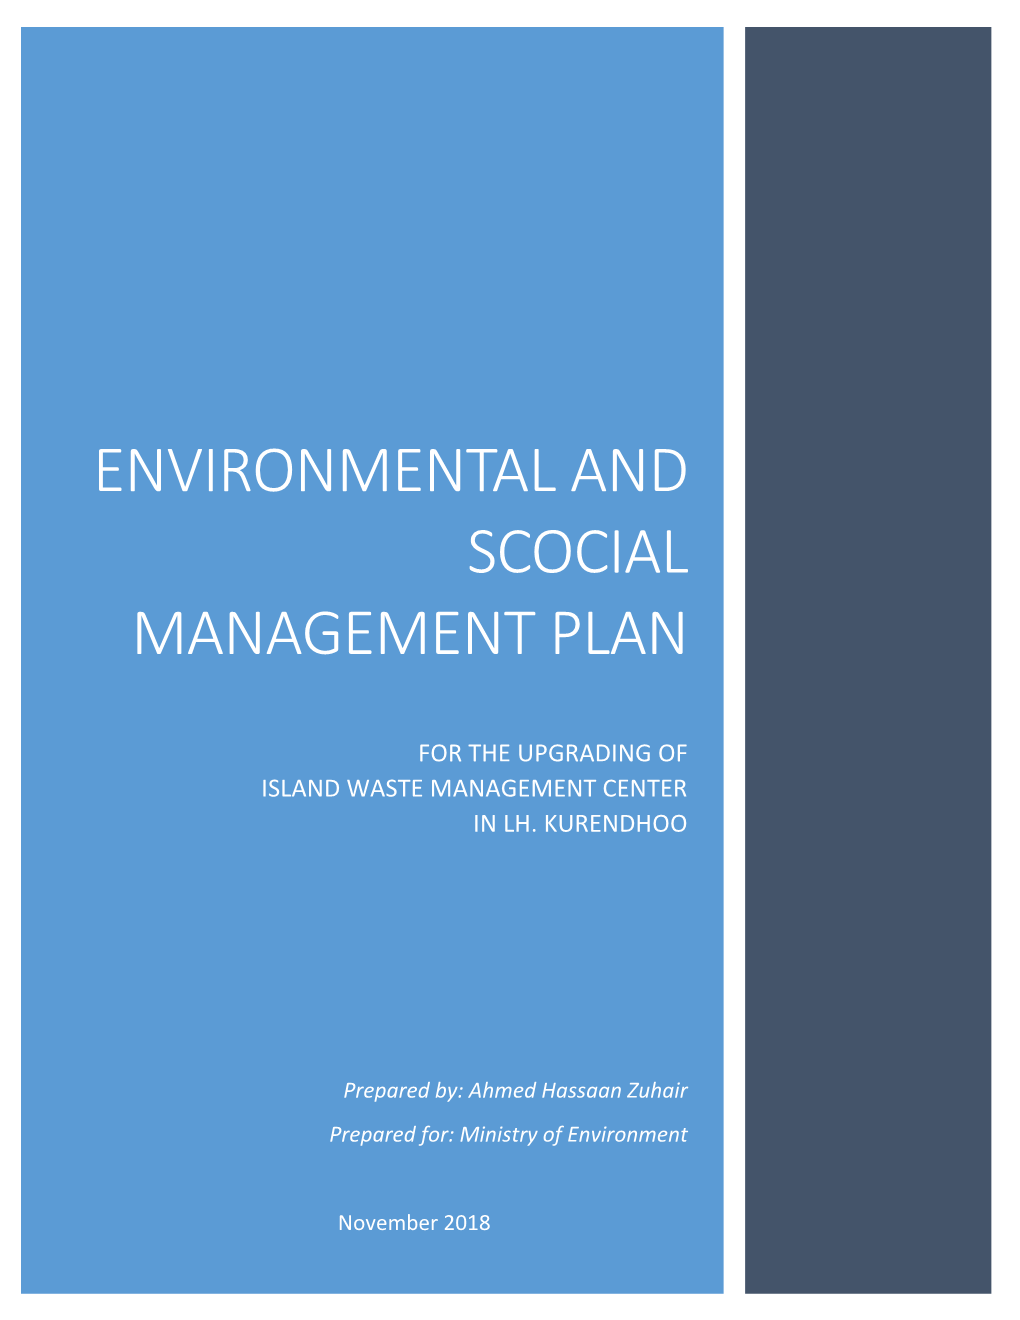 Environmental and Scocial Management Plan